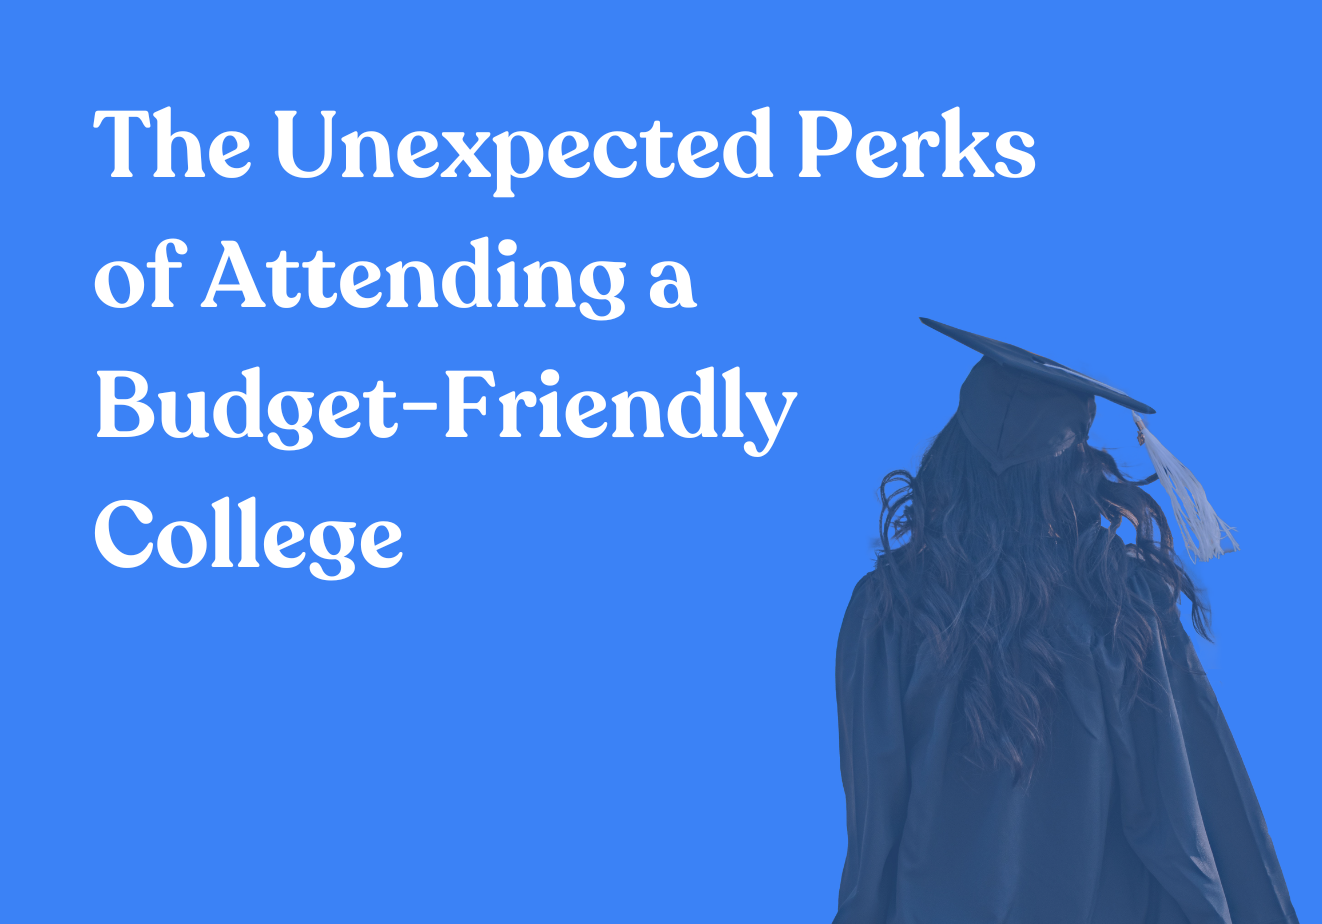 The Unexpected Perks of Attending a Budget-Friendly College